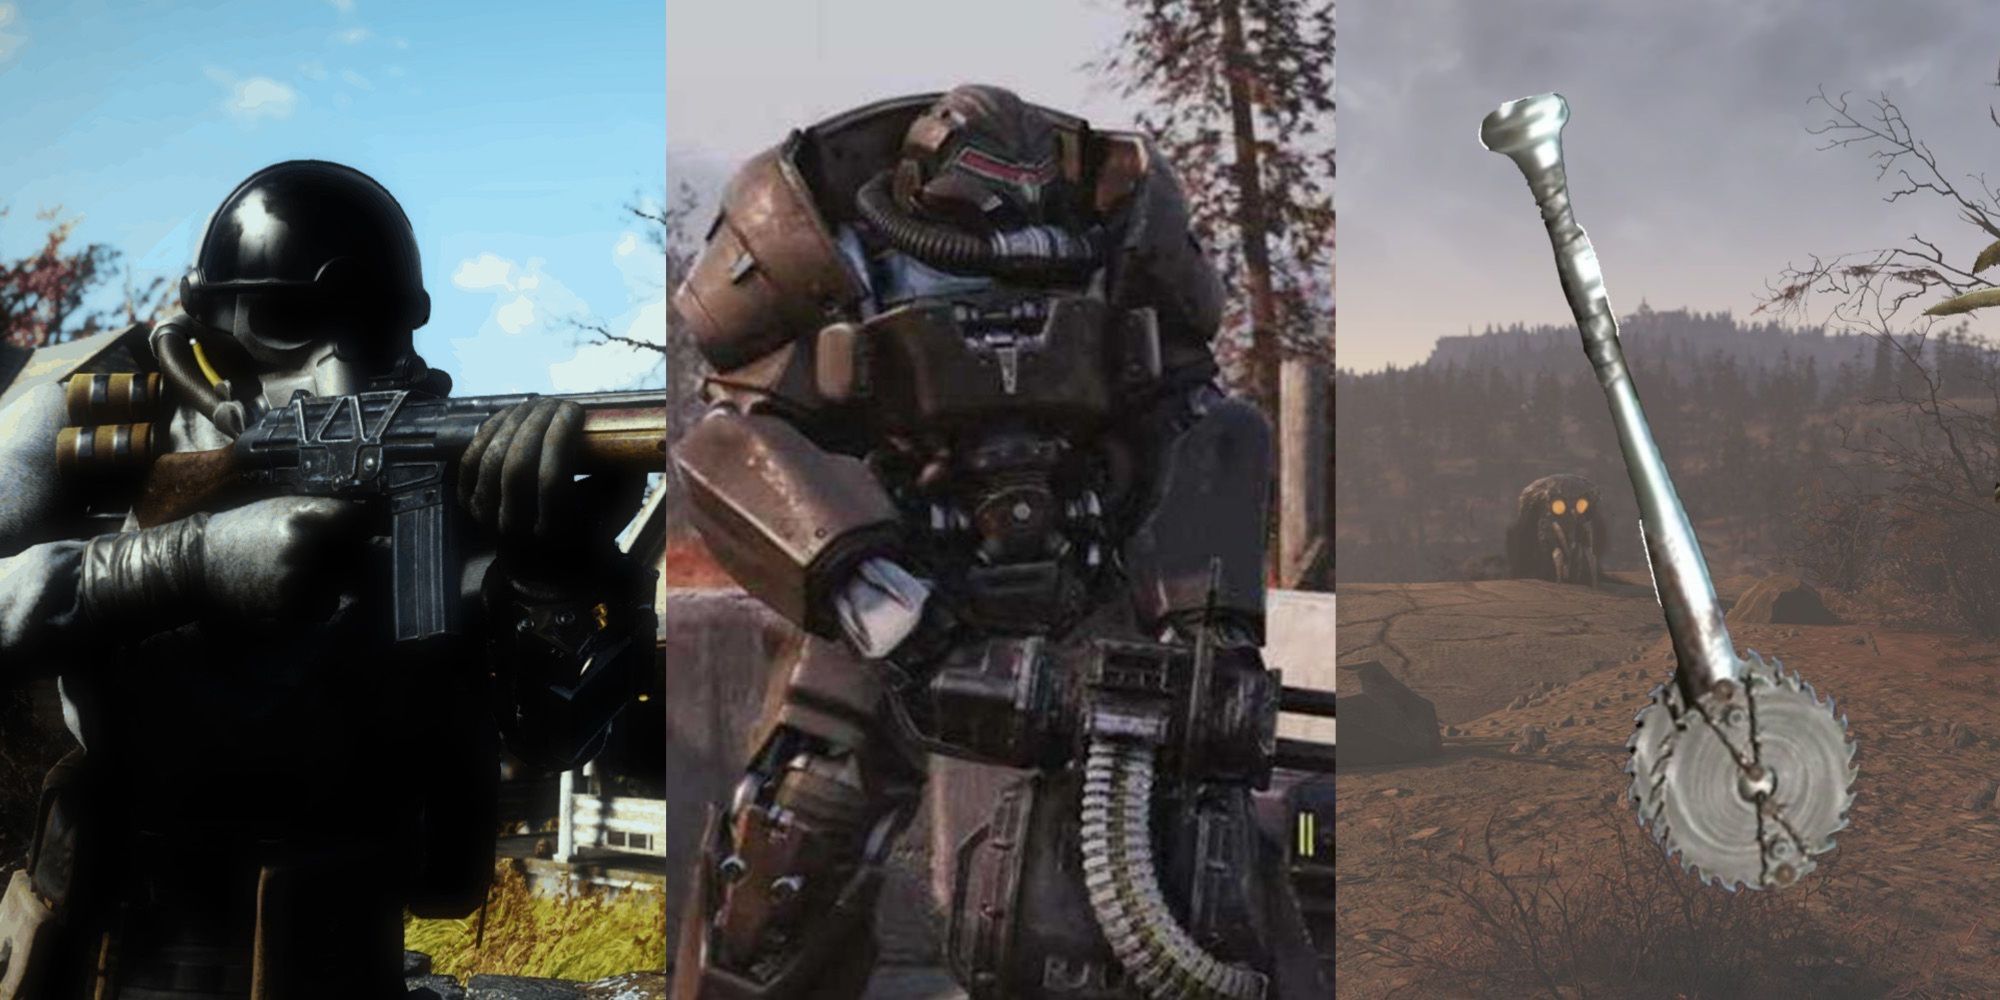 The main character aims down a rifle sight. Someone equipped in full Hellcat power armor brandishes a large Gatling gun. A melee weapon for your Bloodied build in Fallout 76.